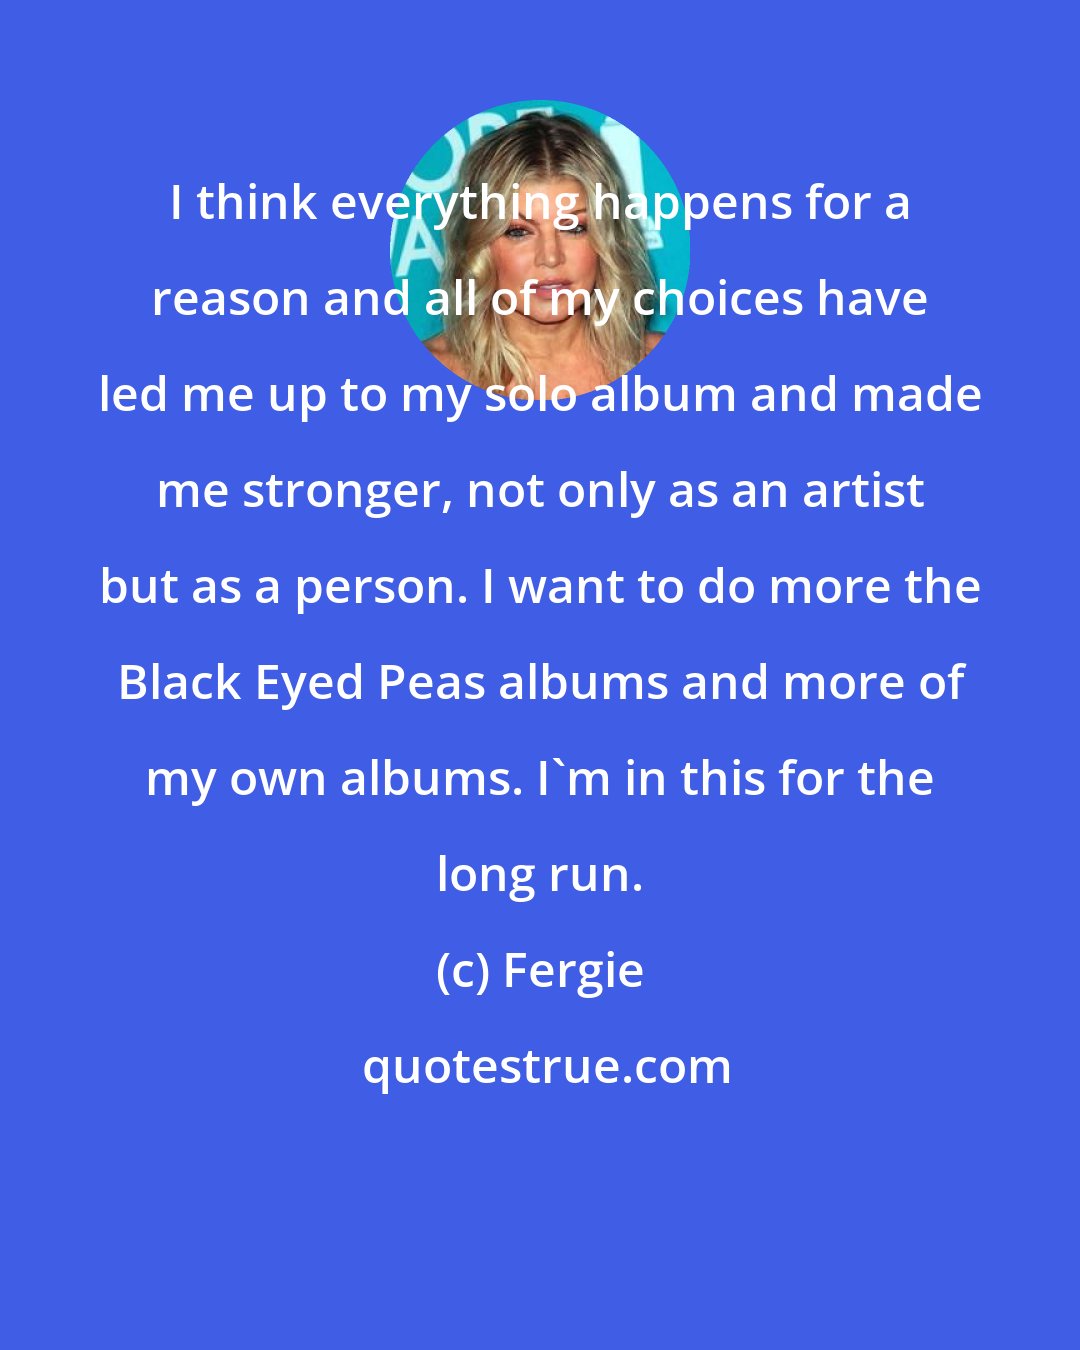 Fergie: I think everything happens for a reason and all of my choices have led me up to my solo album and made me stronger, not only as an artist but as a person. I want to do more the Black Eyed Peas albums and more of my own albums. I'm in this for the long run.